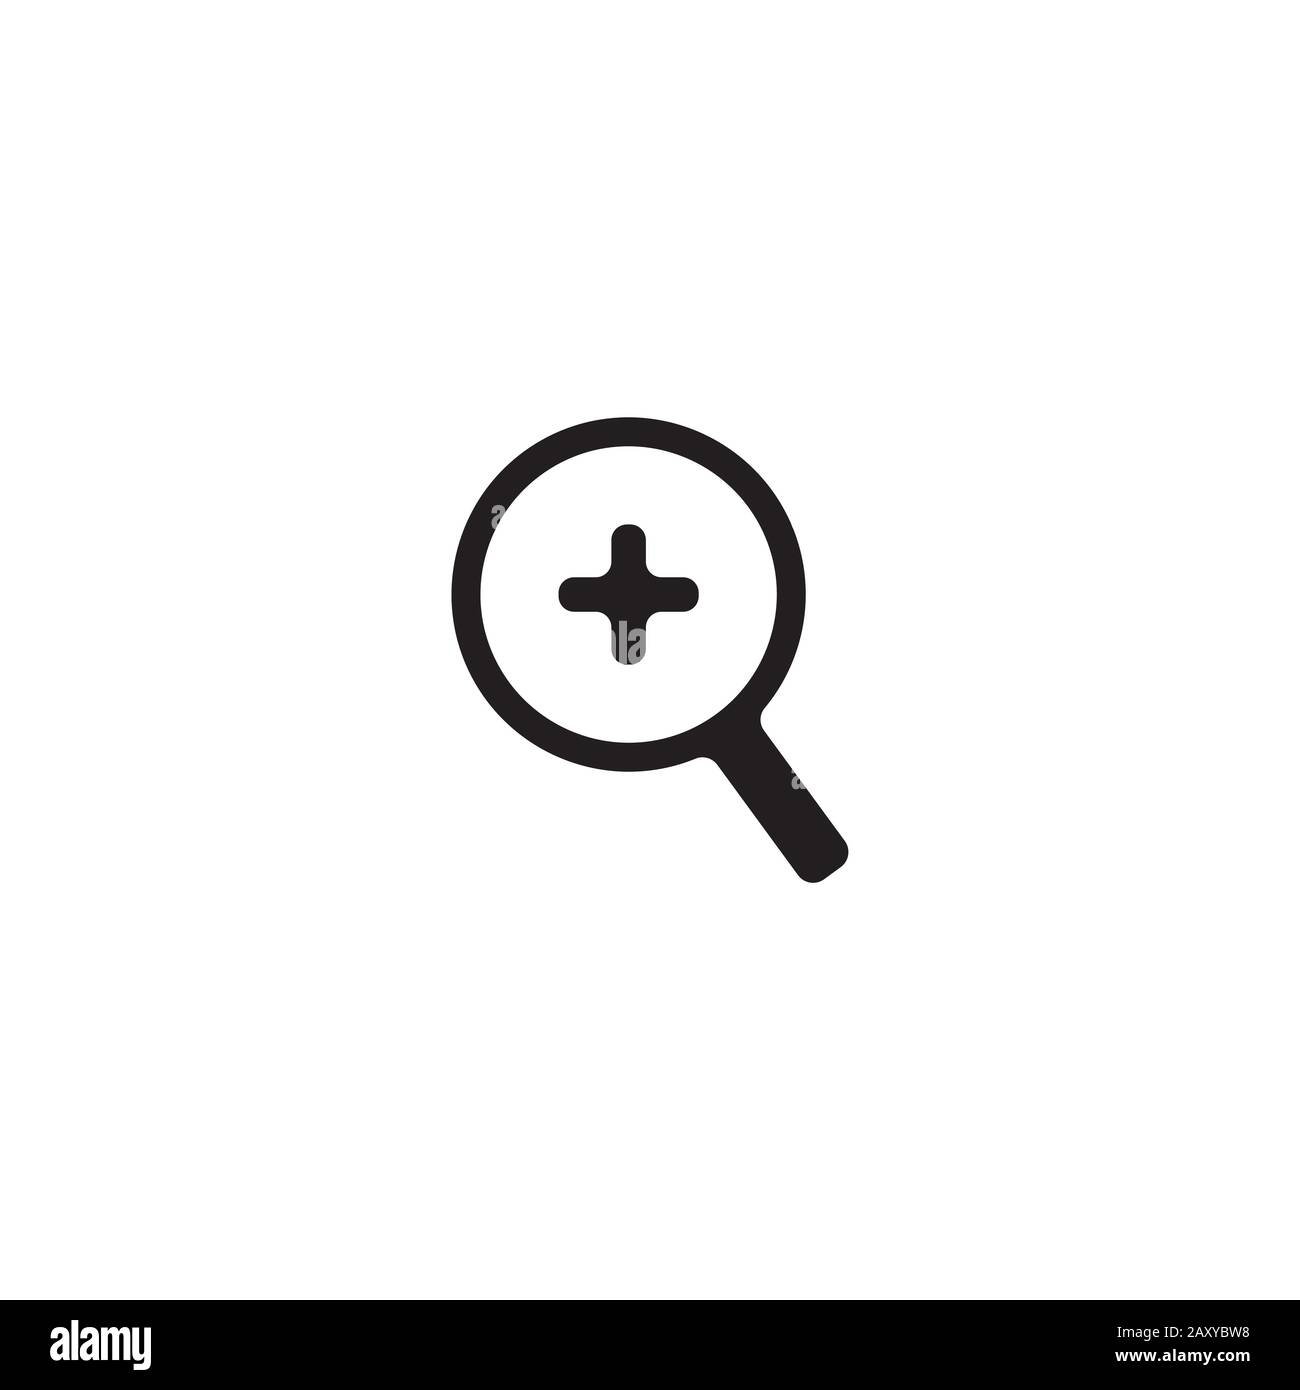 zoom up icon illustration Stock Vector